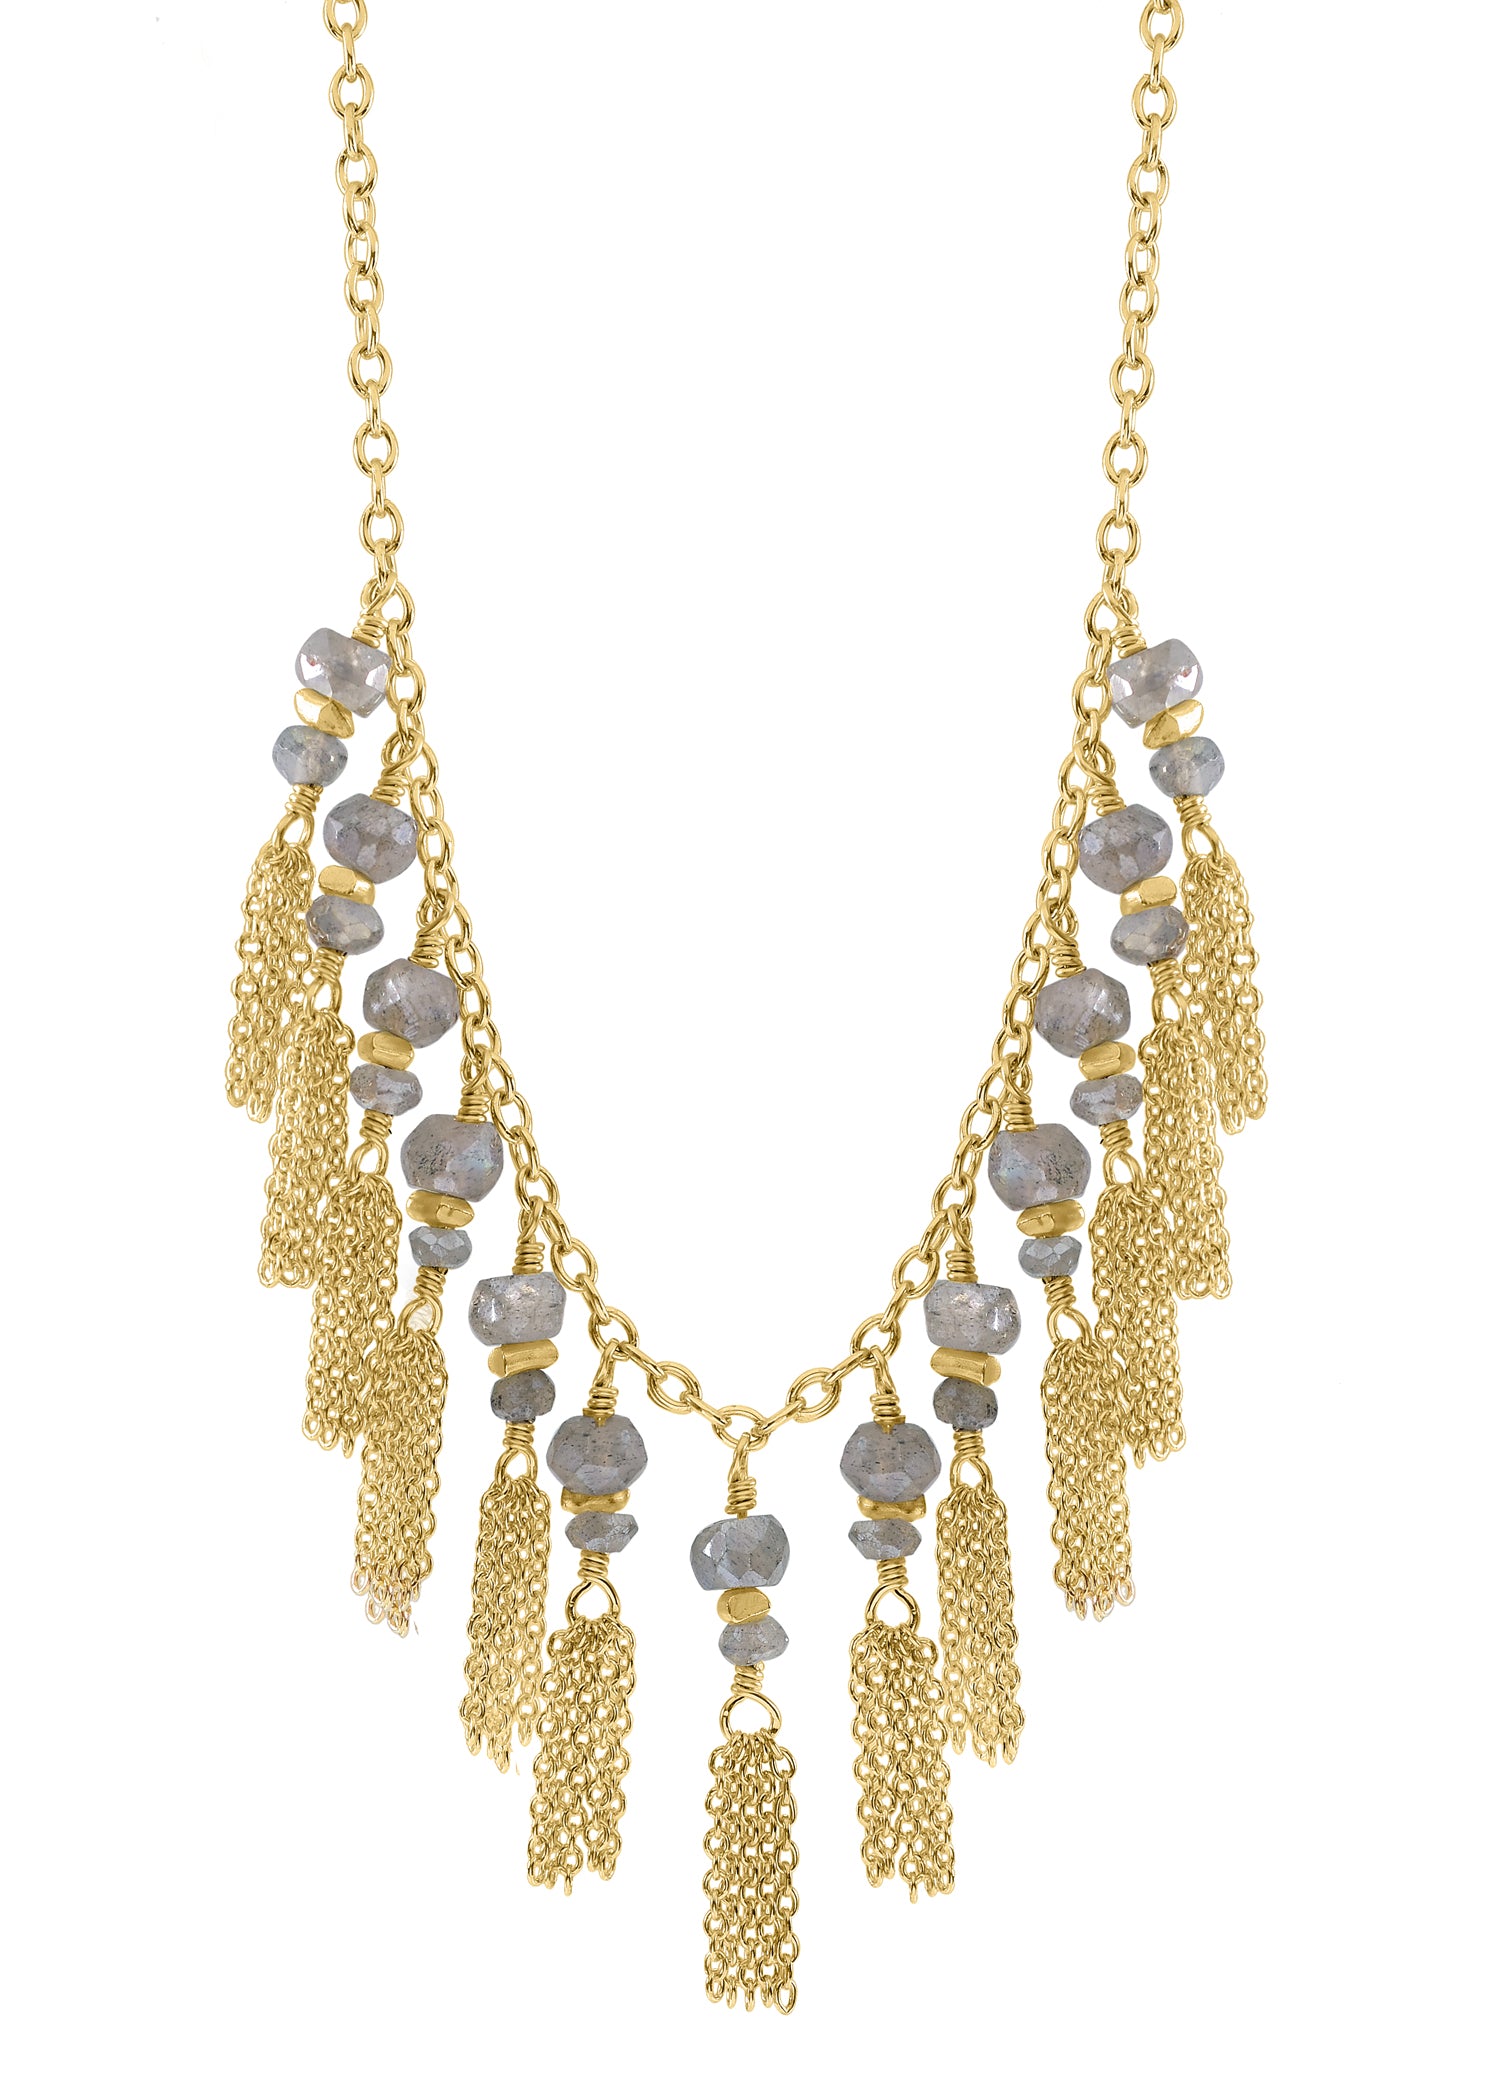 Labradorite 14k gold fill 14k gold vermeil sterling silver beads Necklace measures 17" in length Tassels measure 3/4" in length and 3/16" in width (x13) Handmade in our Los Angeles studio